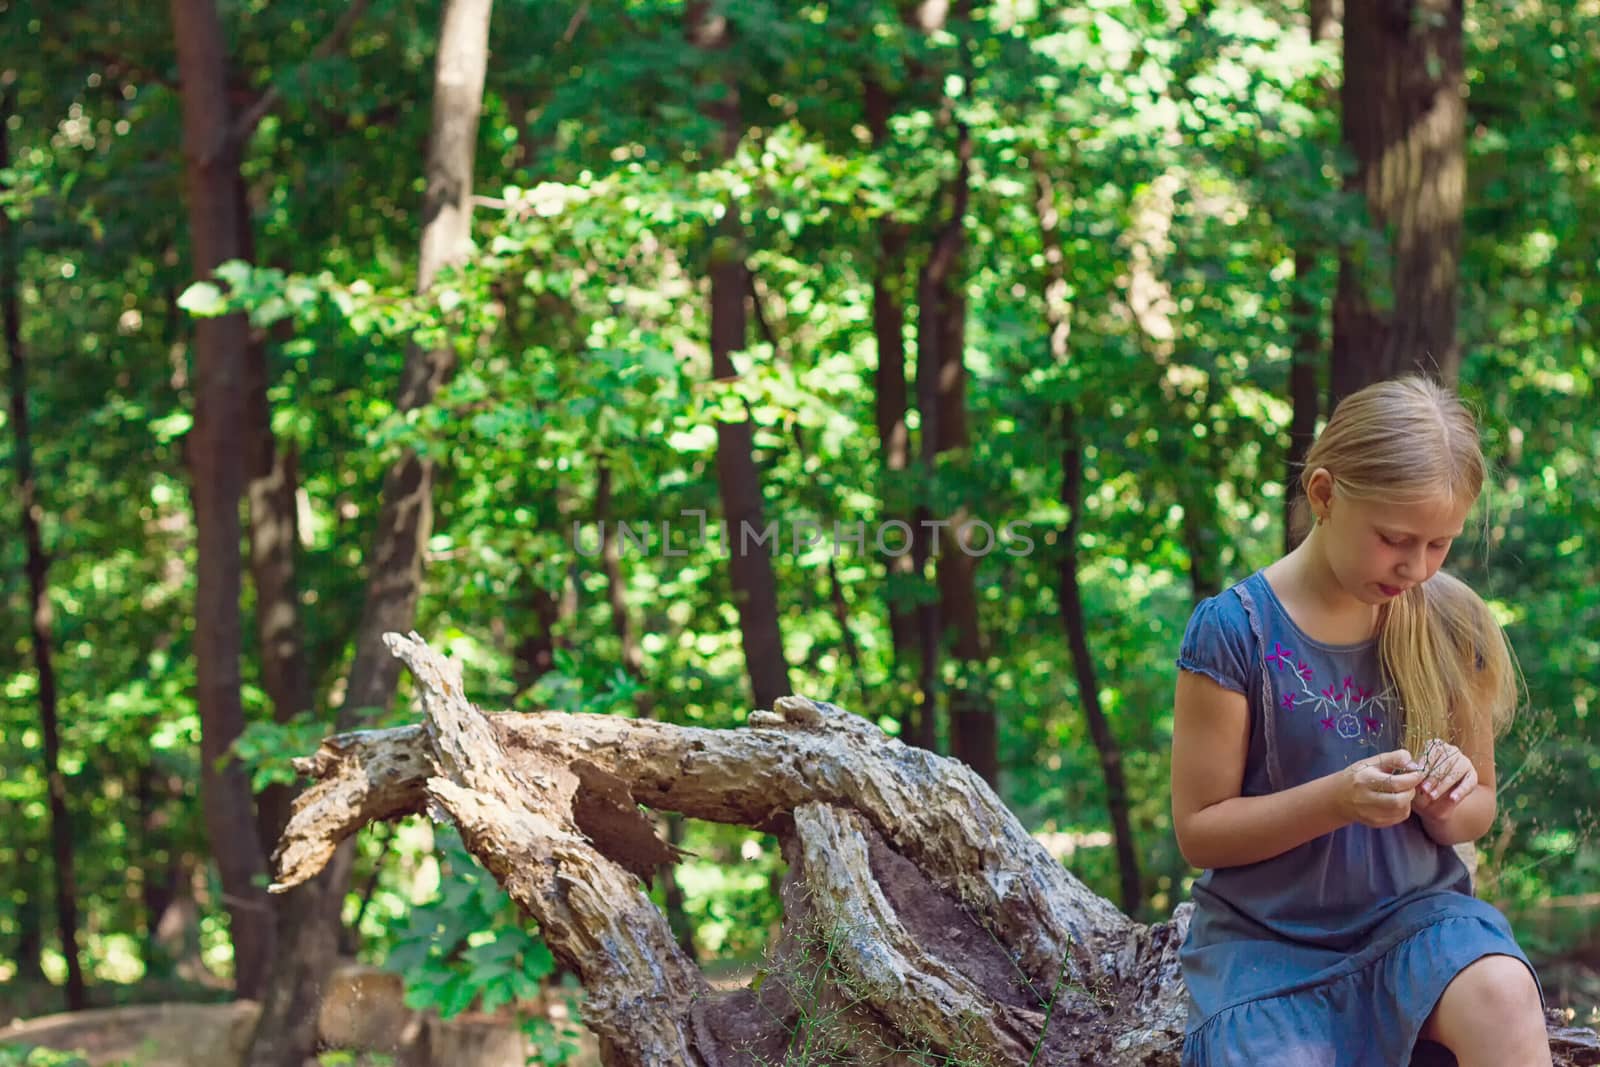 Girl sitting on a tree stump in a forest